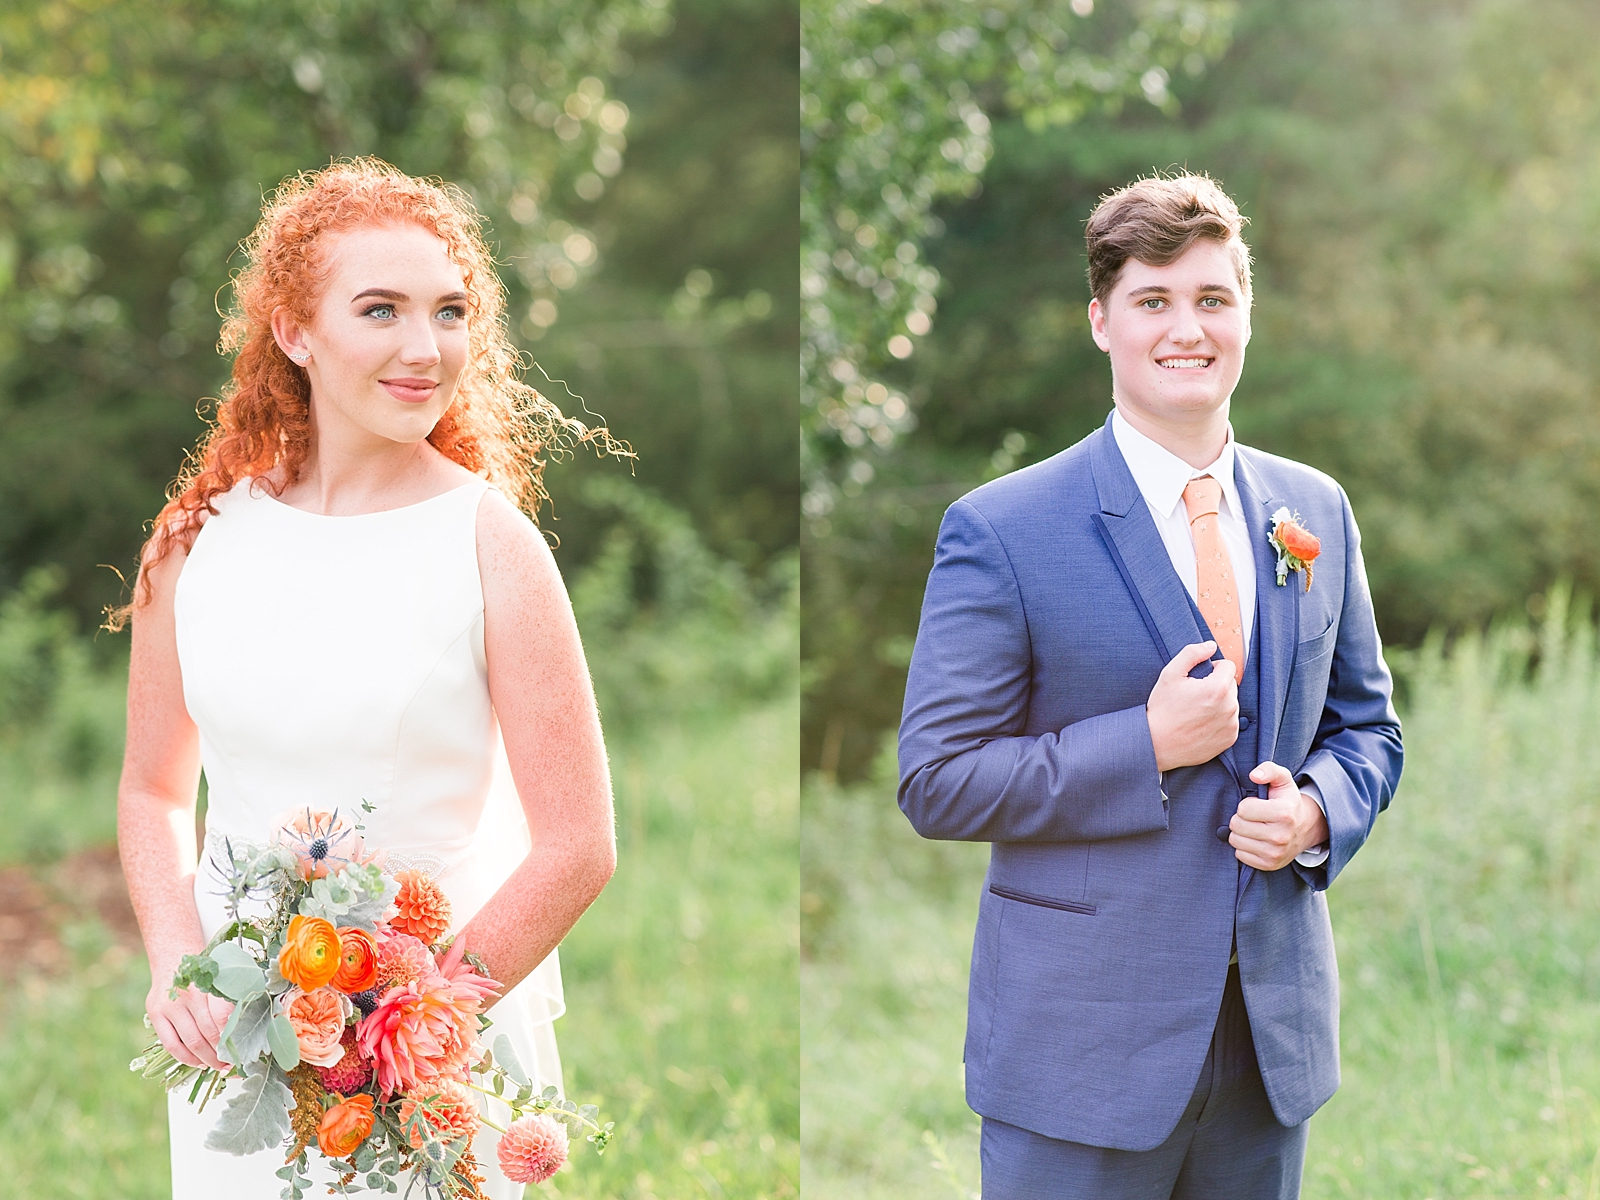 Chestnut Ridge Wedding bridal portrait with hair blowing in wind and groom portrait holding jacket Photos